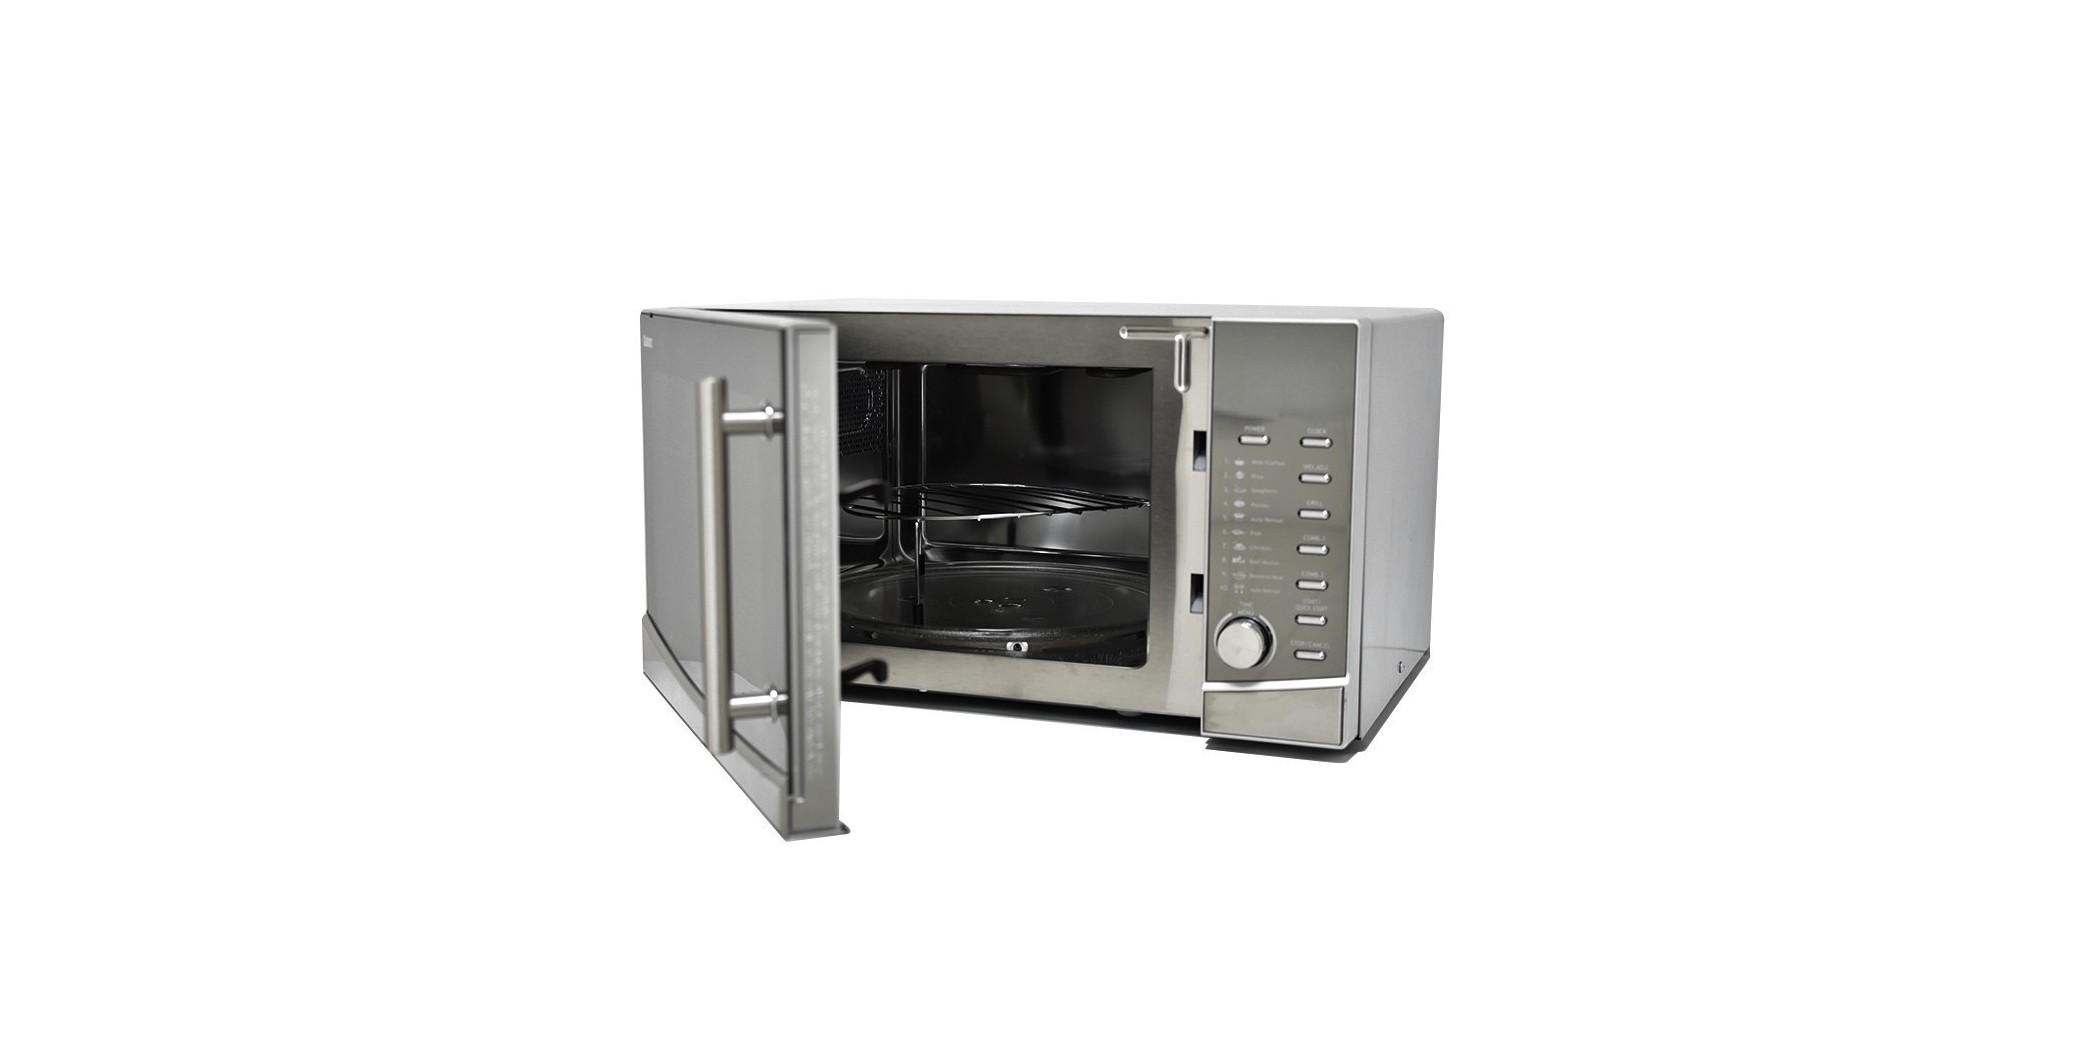 Galanz GM30DGS Microwave Oven